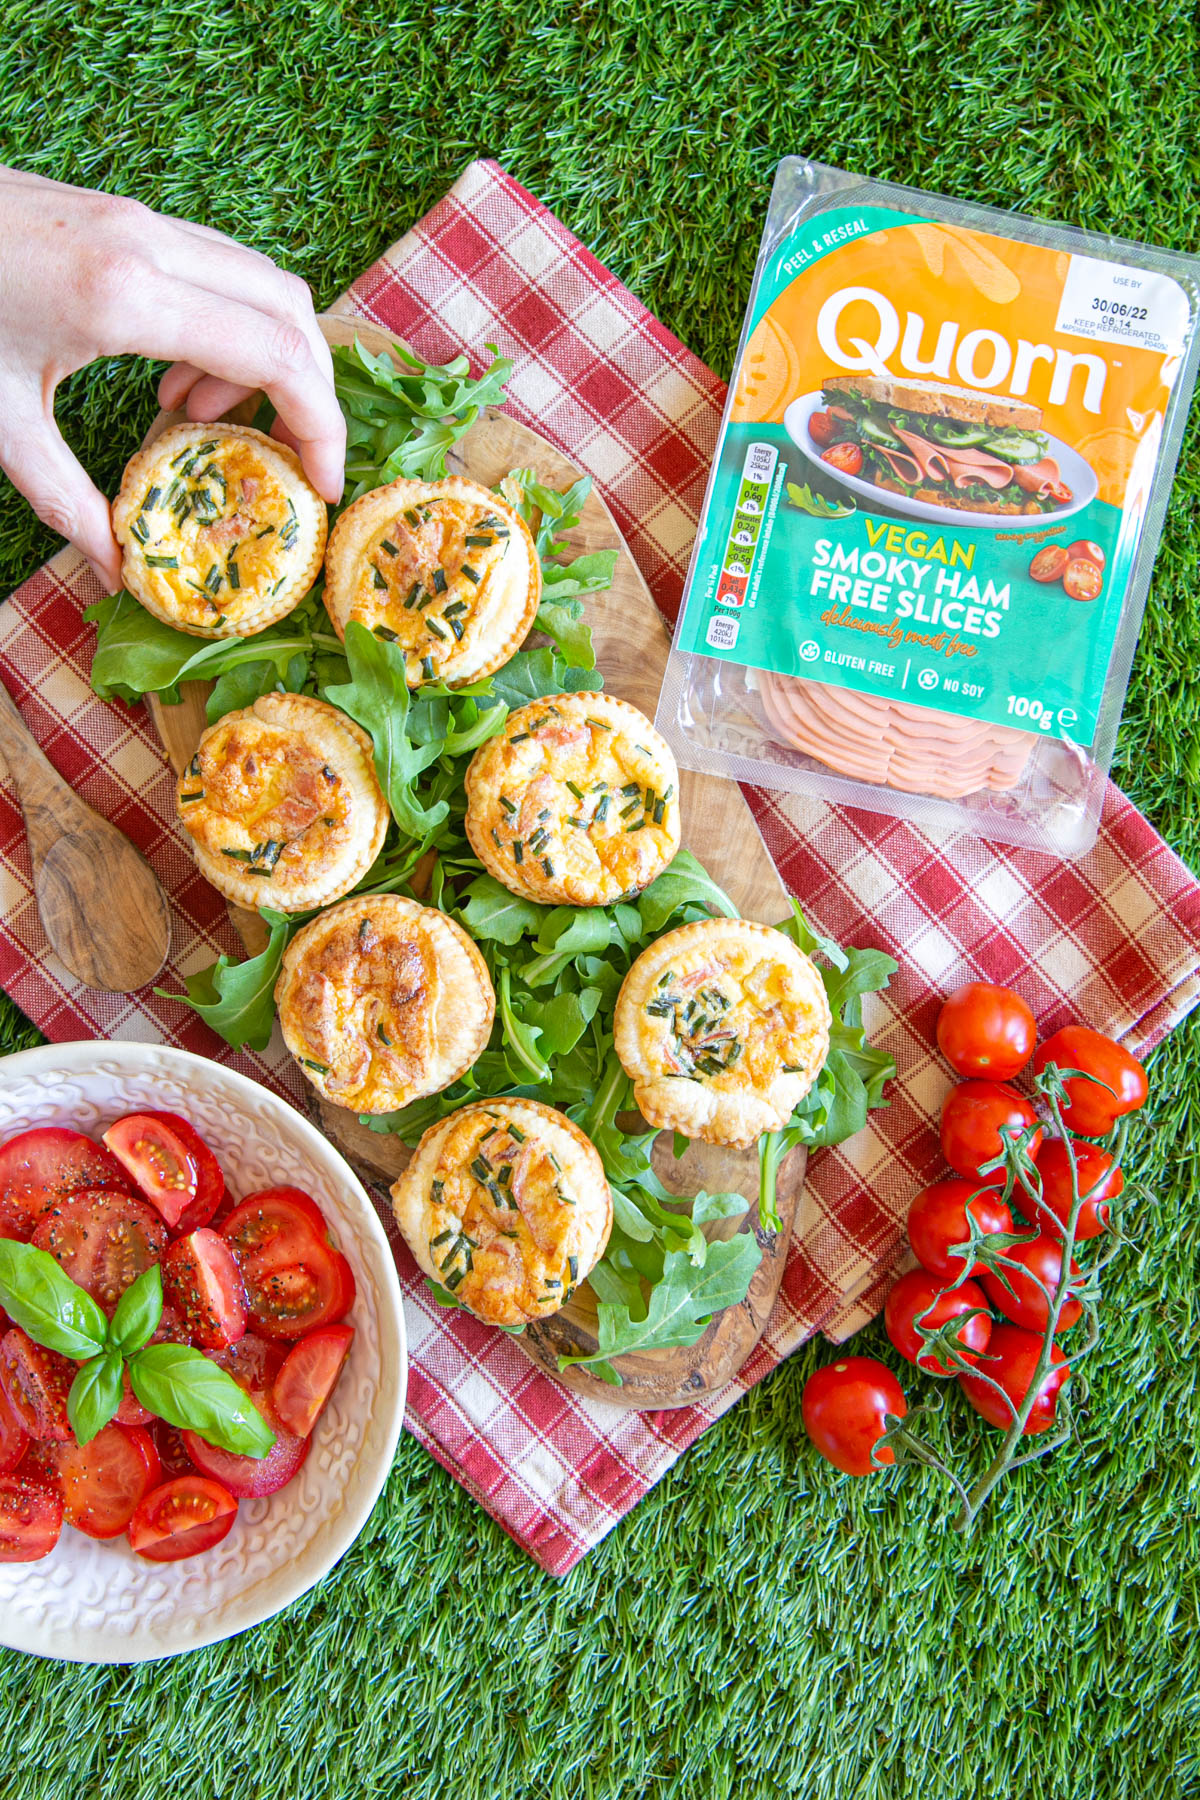 Picnic time! Mini Quorn quiche Lorraines for all, served on a wooden board alongside some juicy tomatoes. Somebody is already taking a quiche - they won't last long!.